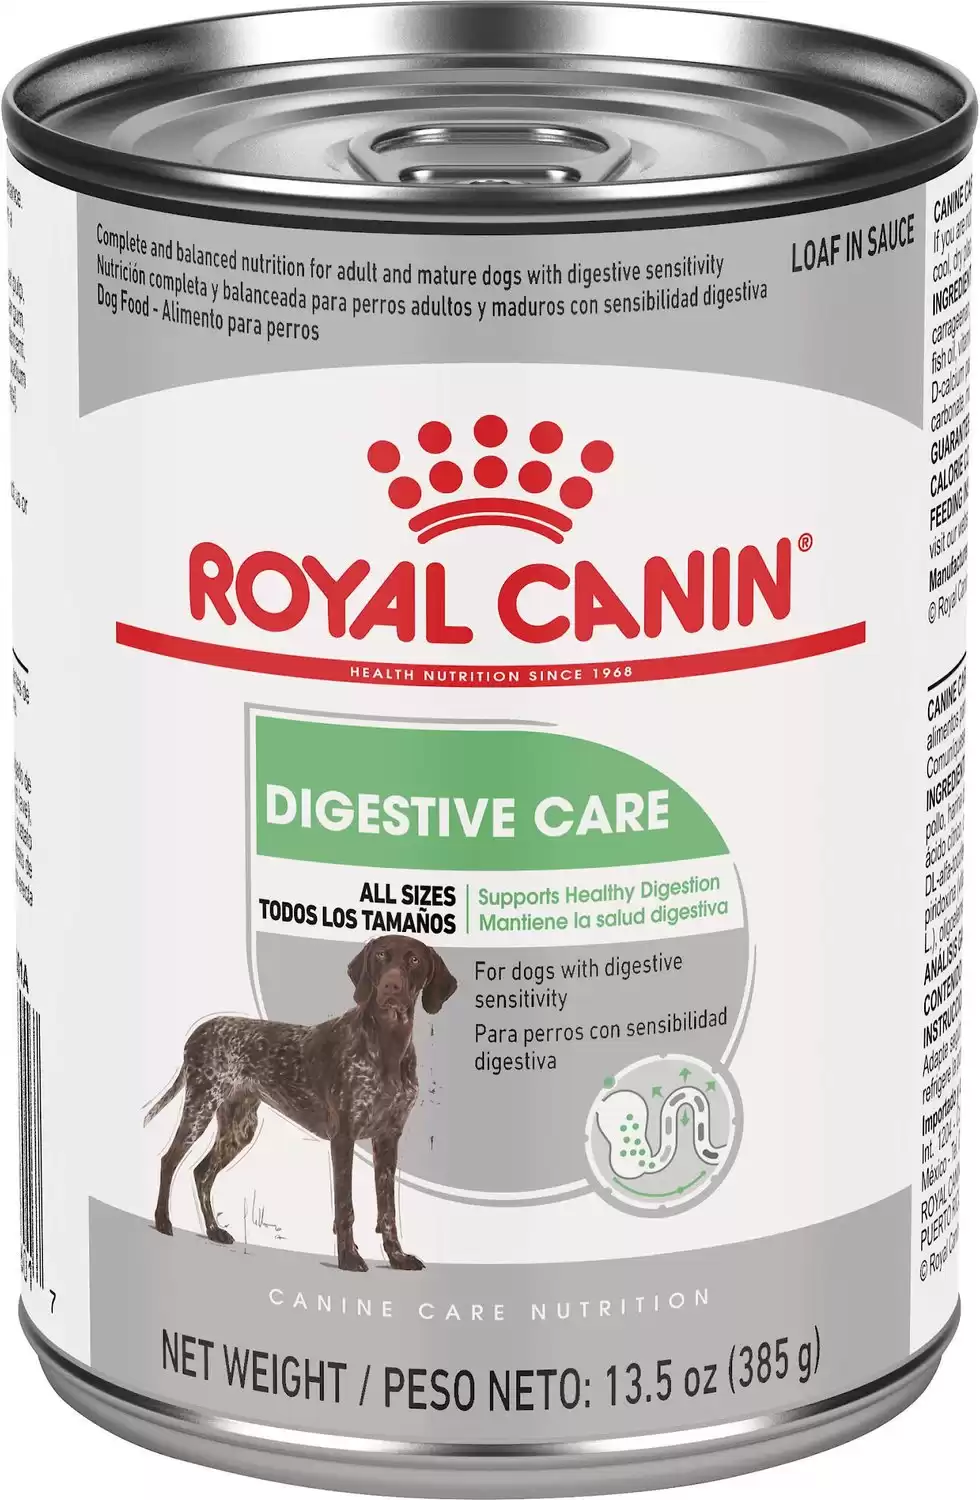 Royal Canin Canine Care Nutrition Digestive Care Loaf in Sauce